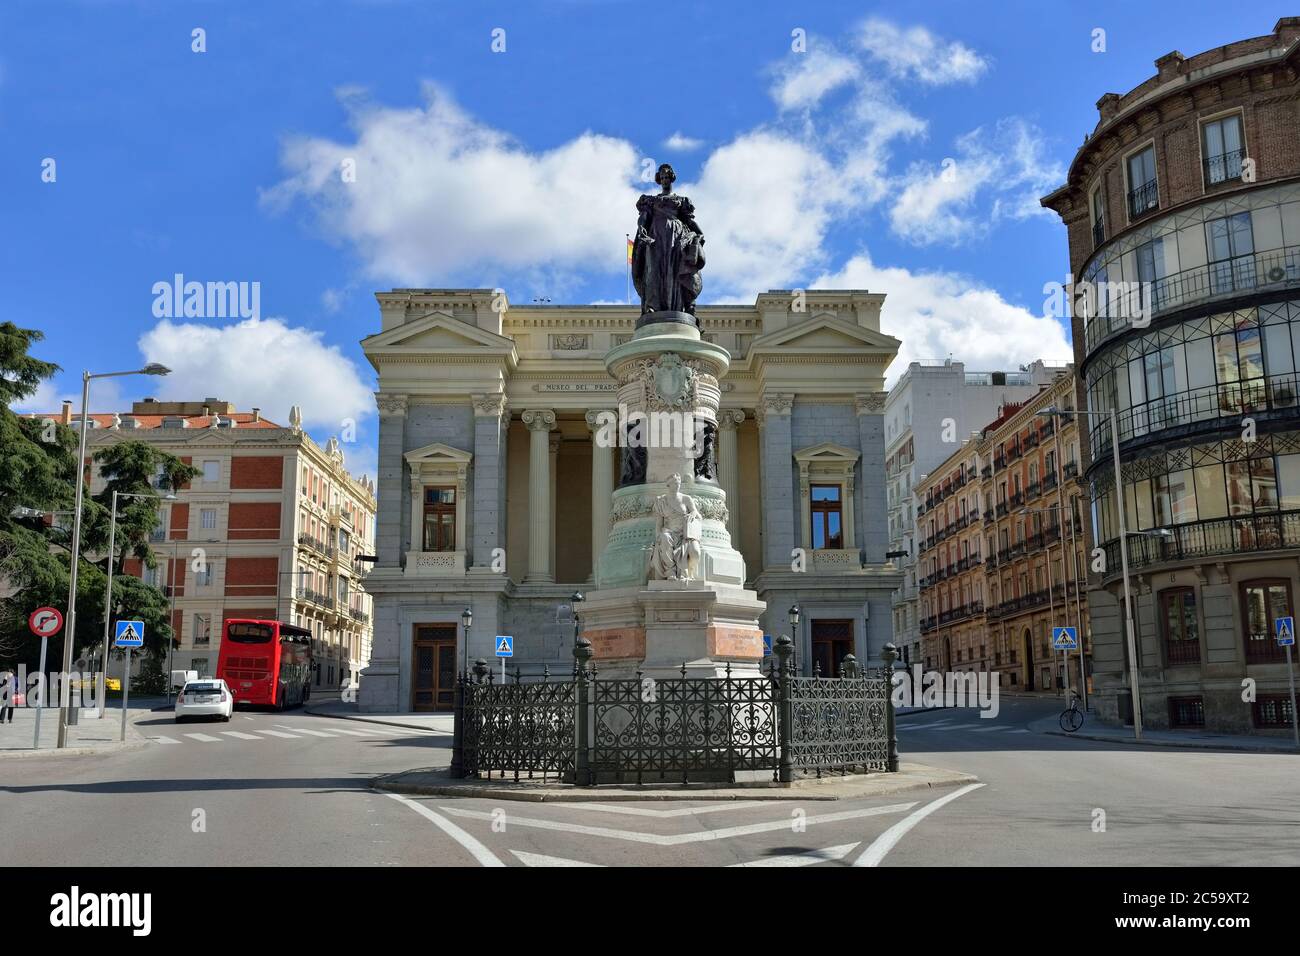 MADRID - MAR 3, 2014: Prado Museum in Madrid features one of the world's finest collections of European Art with over 21,000 pieces. The front of the Stock Photo